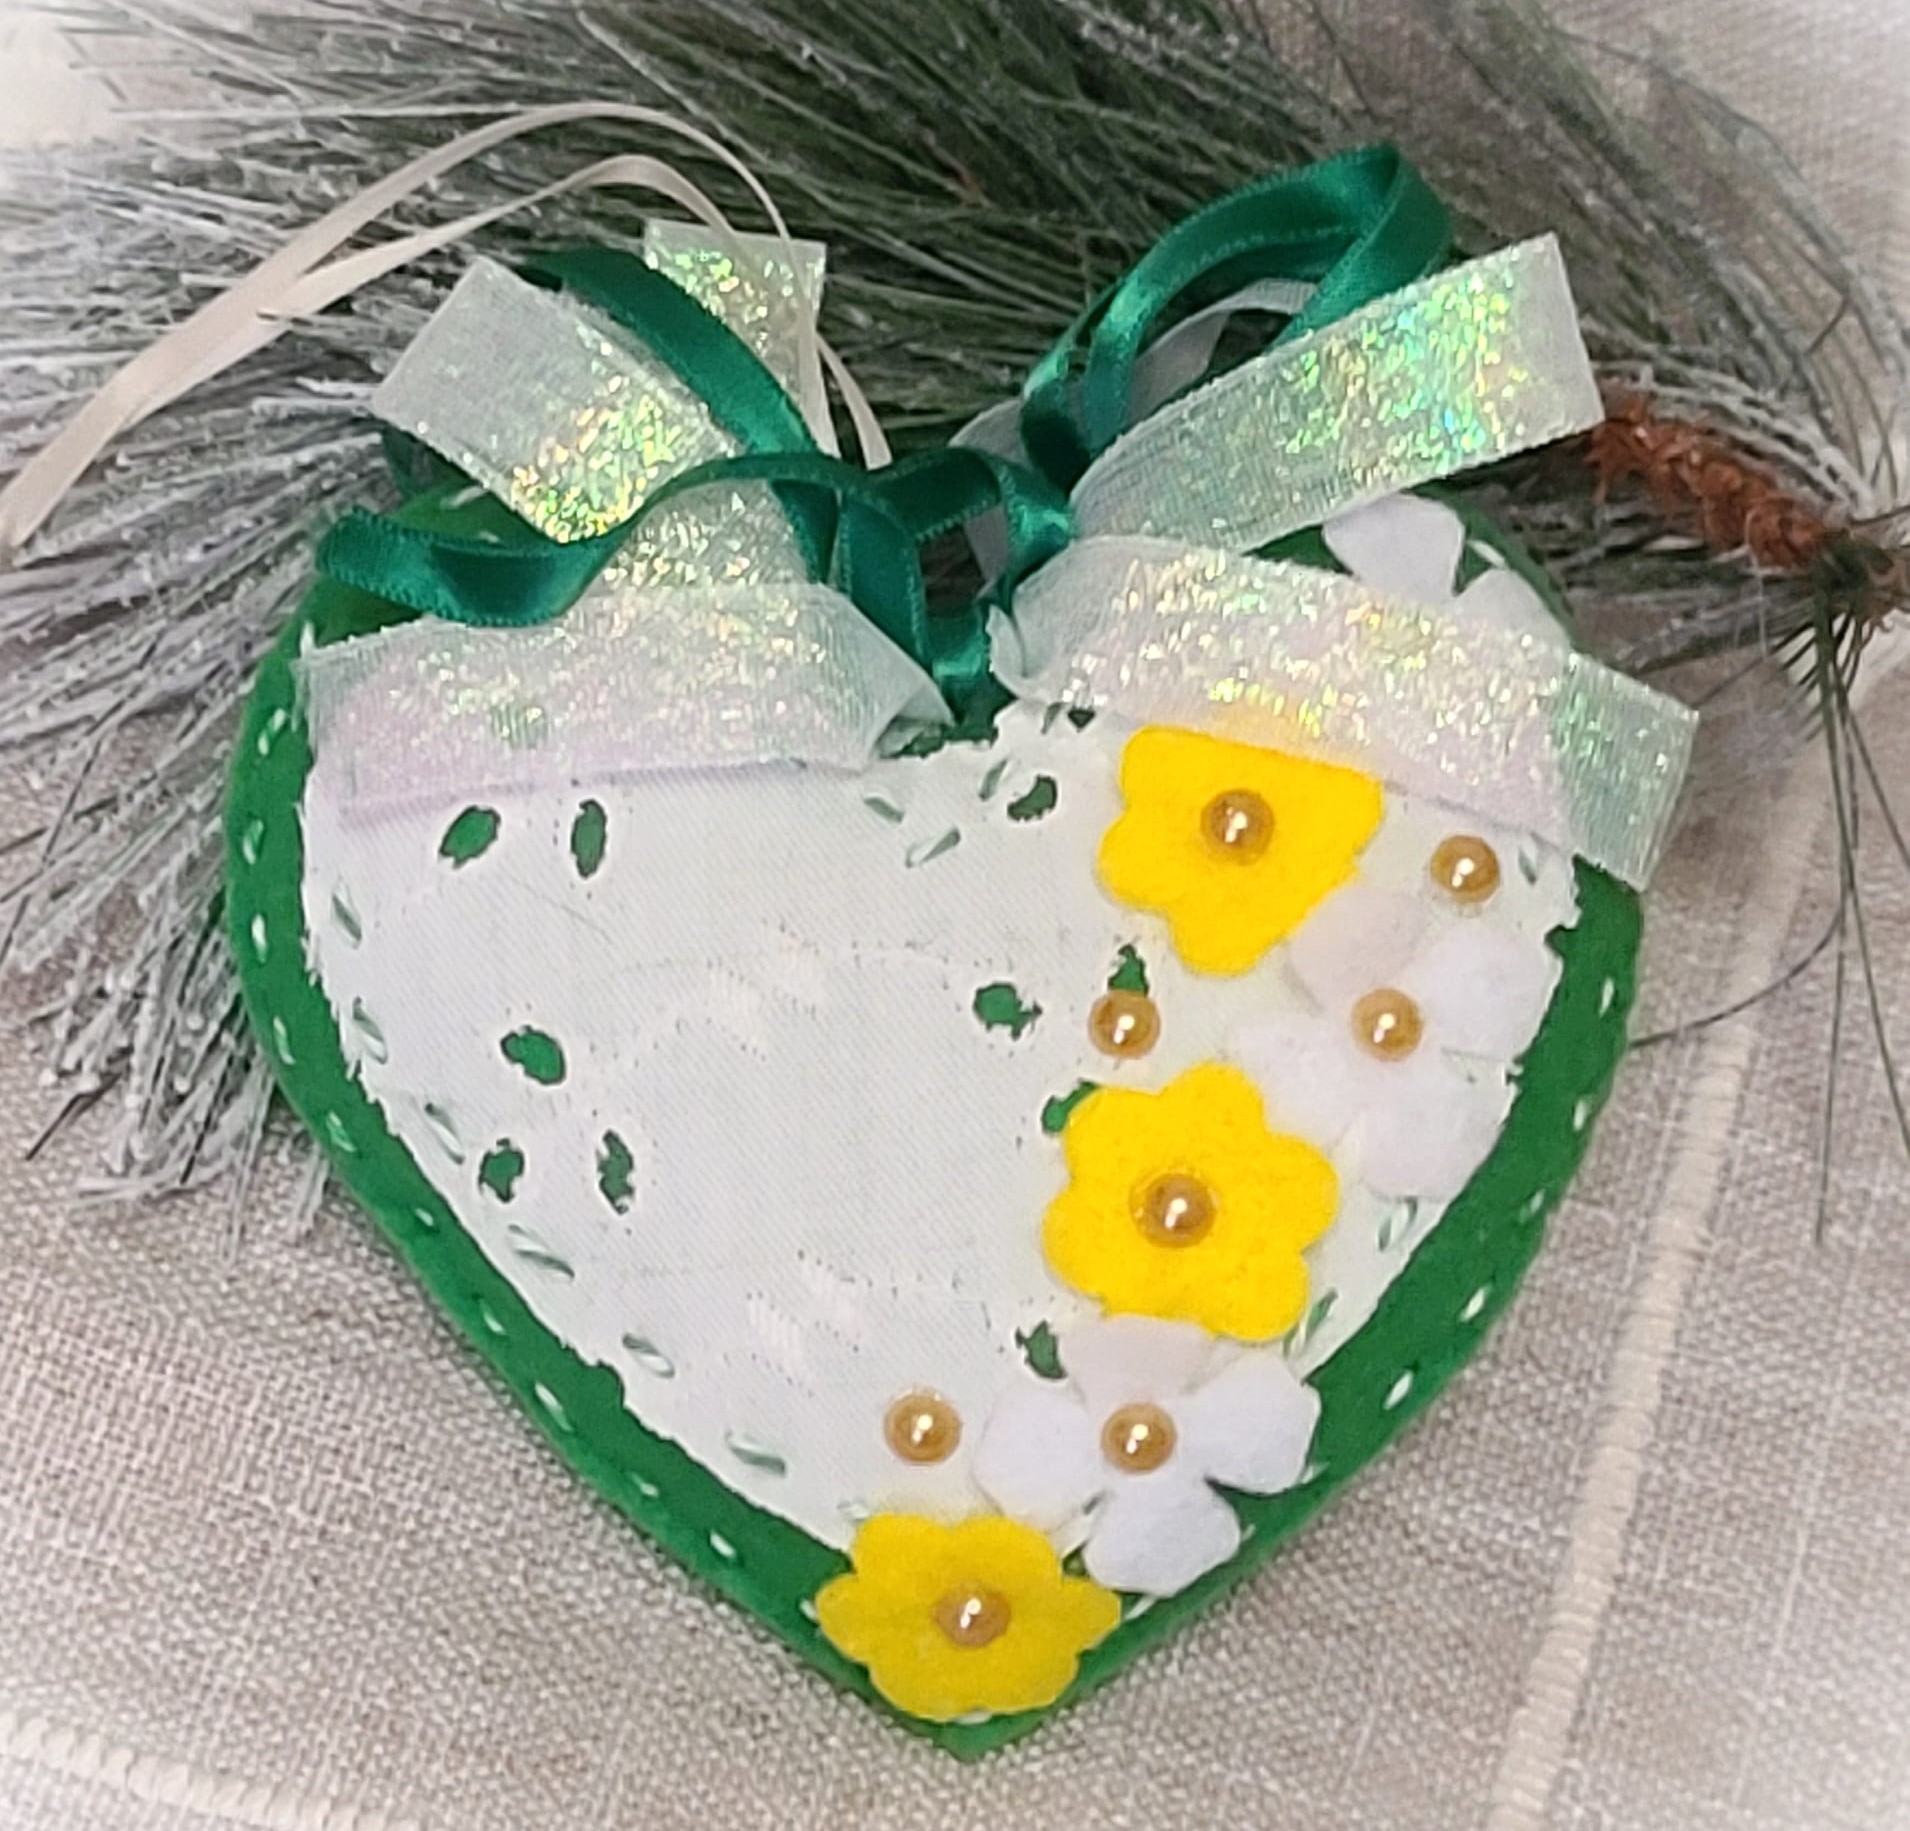 Felt Spring heart ornament with lace and yellow flowers